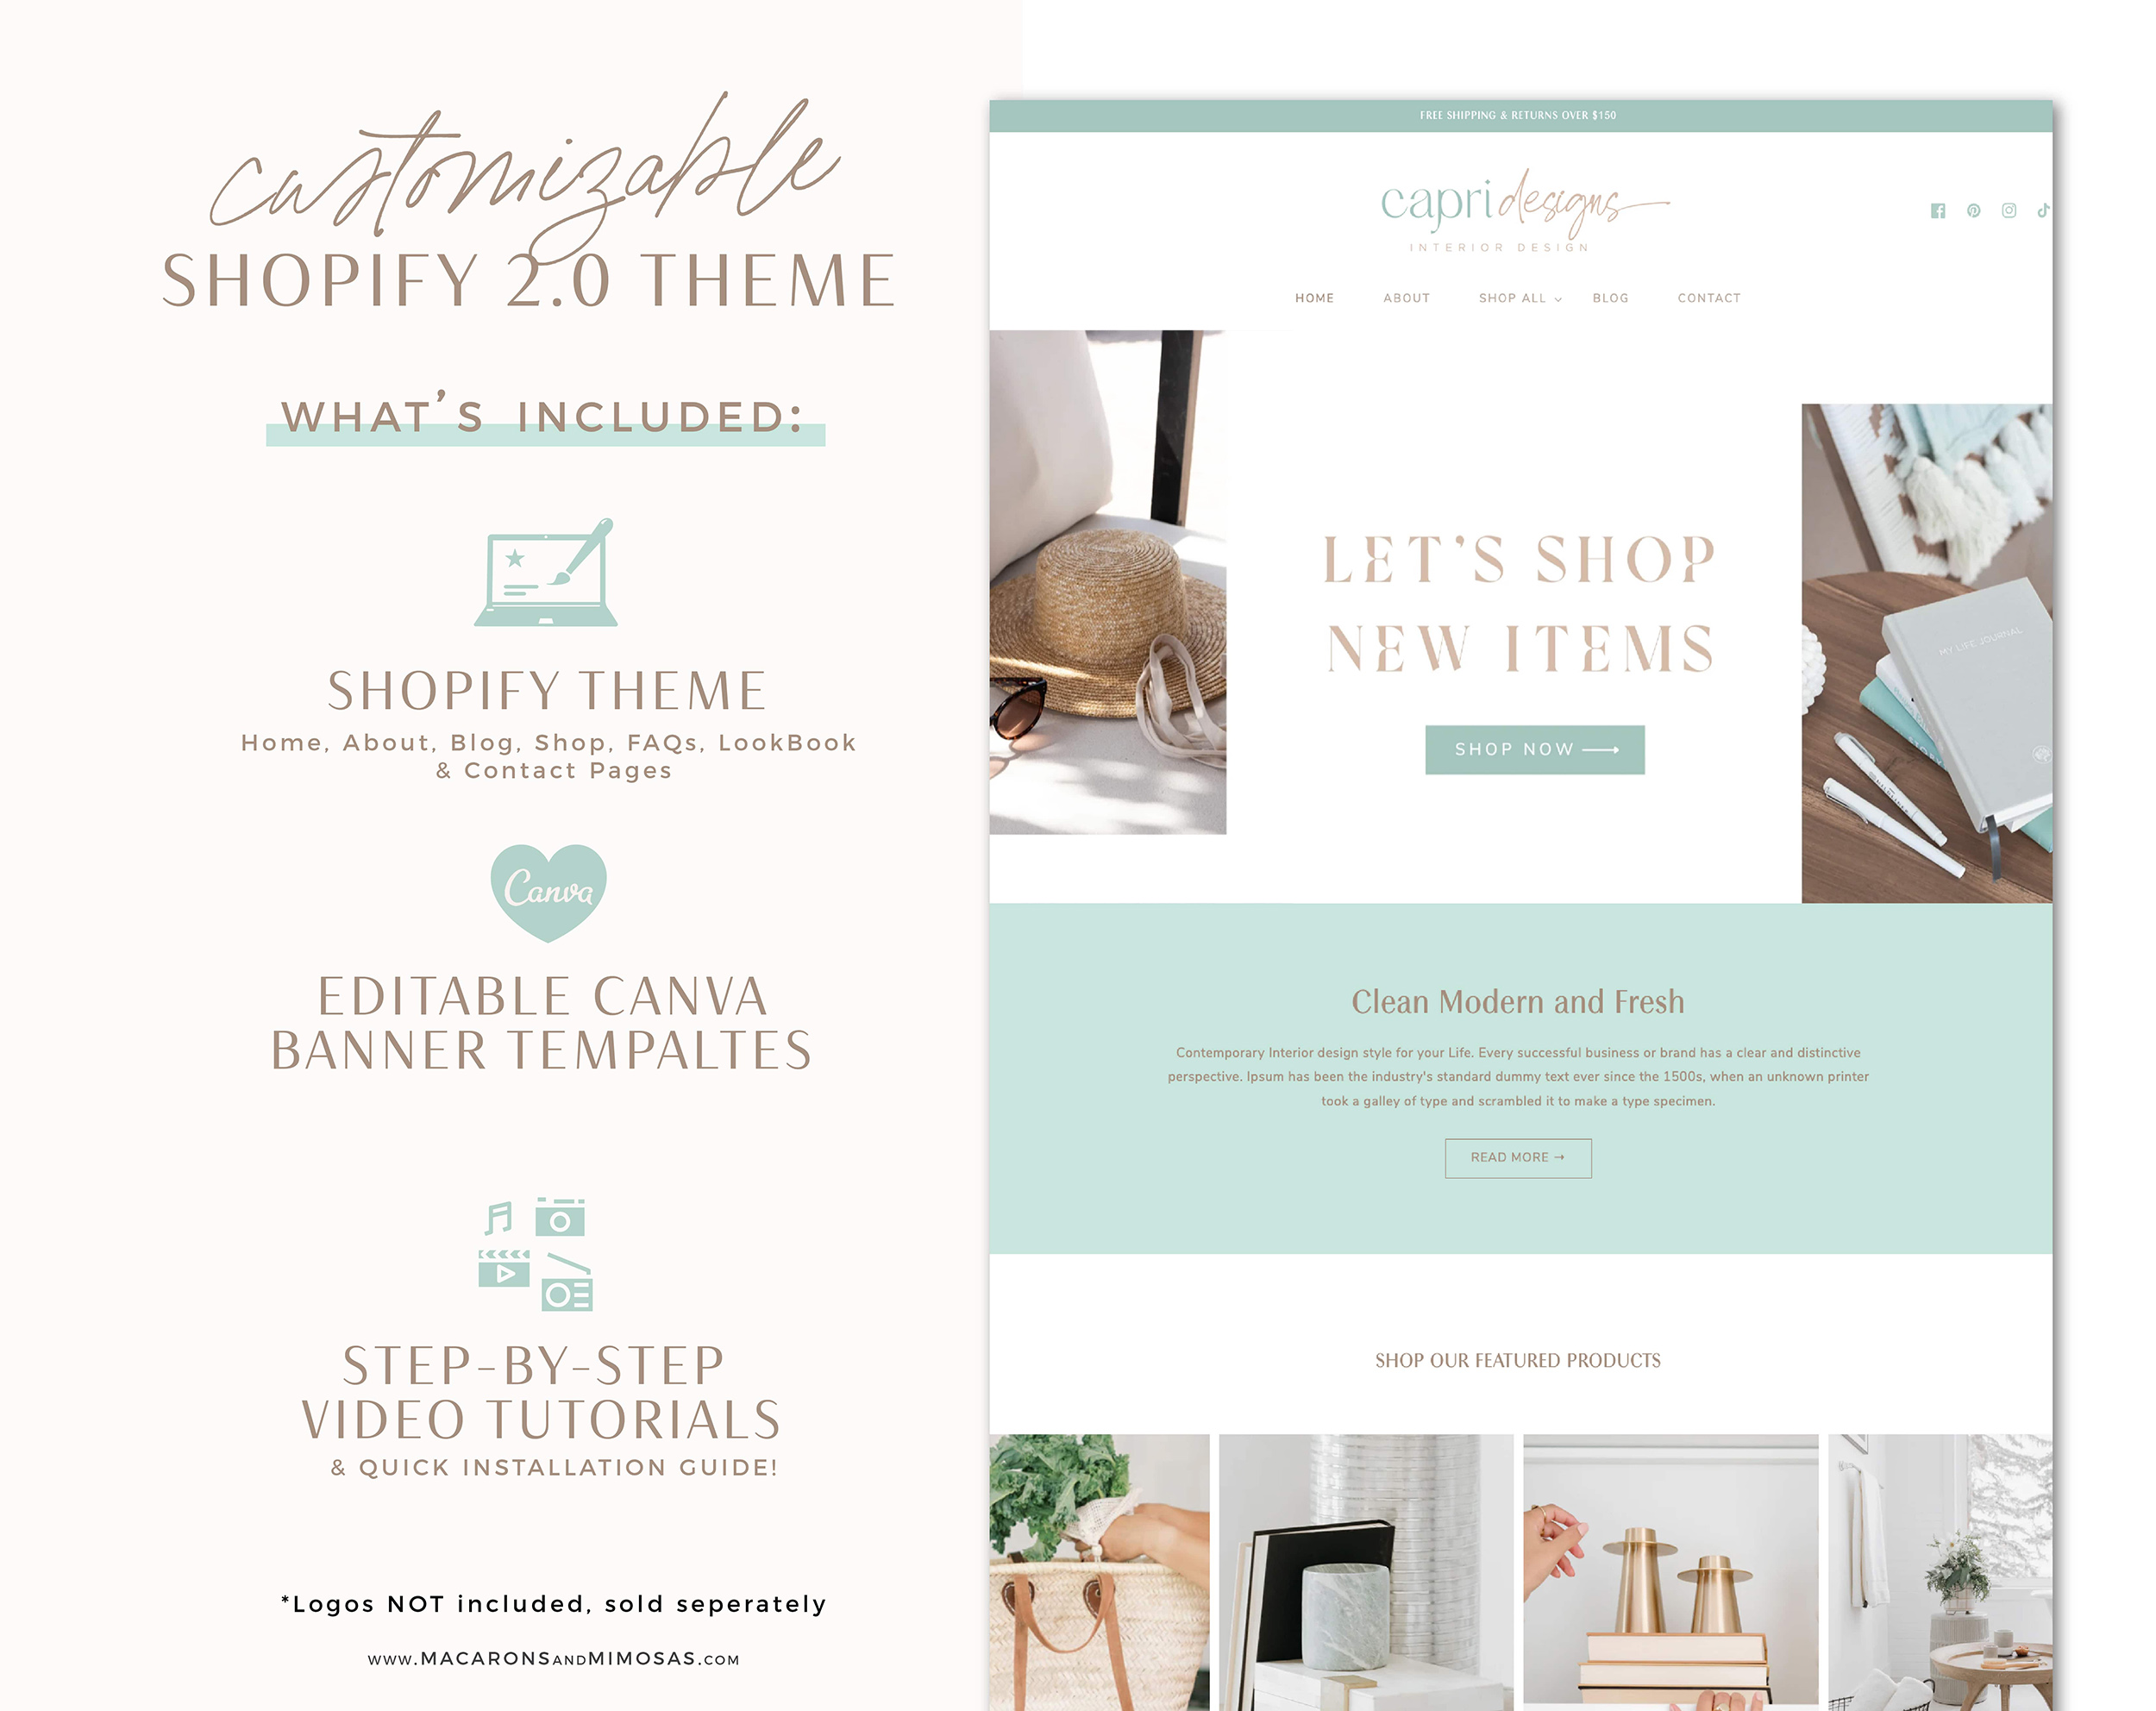 Pretty Shopify Theme Template, Mint Blue Shopify Theme, Clean Website Design Shopify 0S 2.0 Drag and Drop with Canva Banners